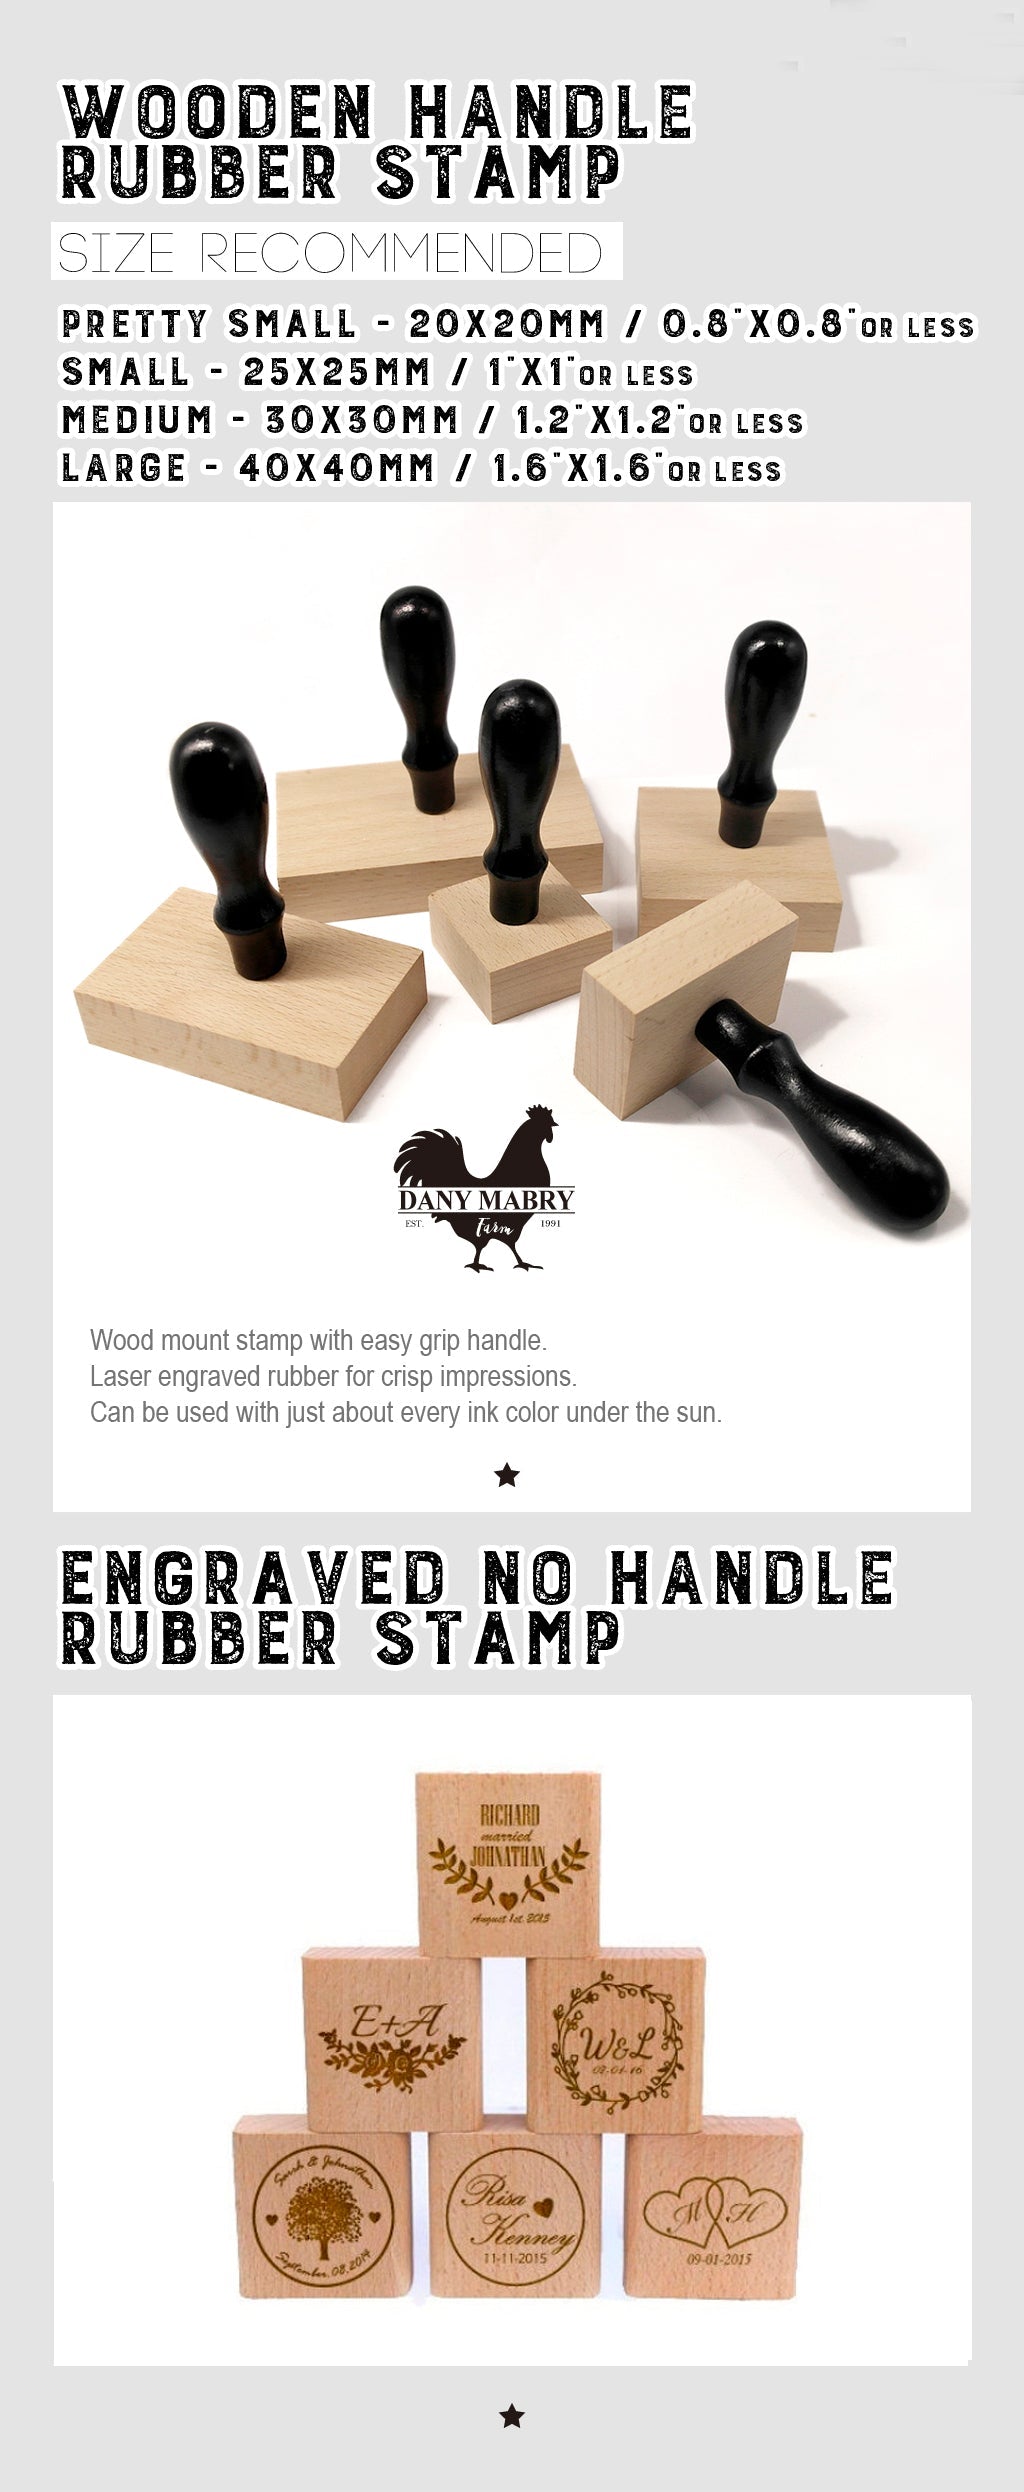 A sample to tell what's Wood Engraved Stamp and Rubber Stamp.